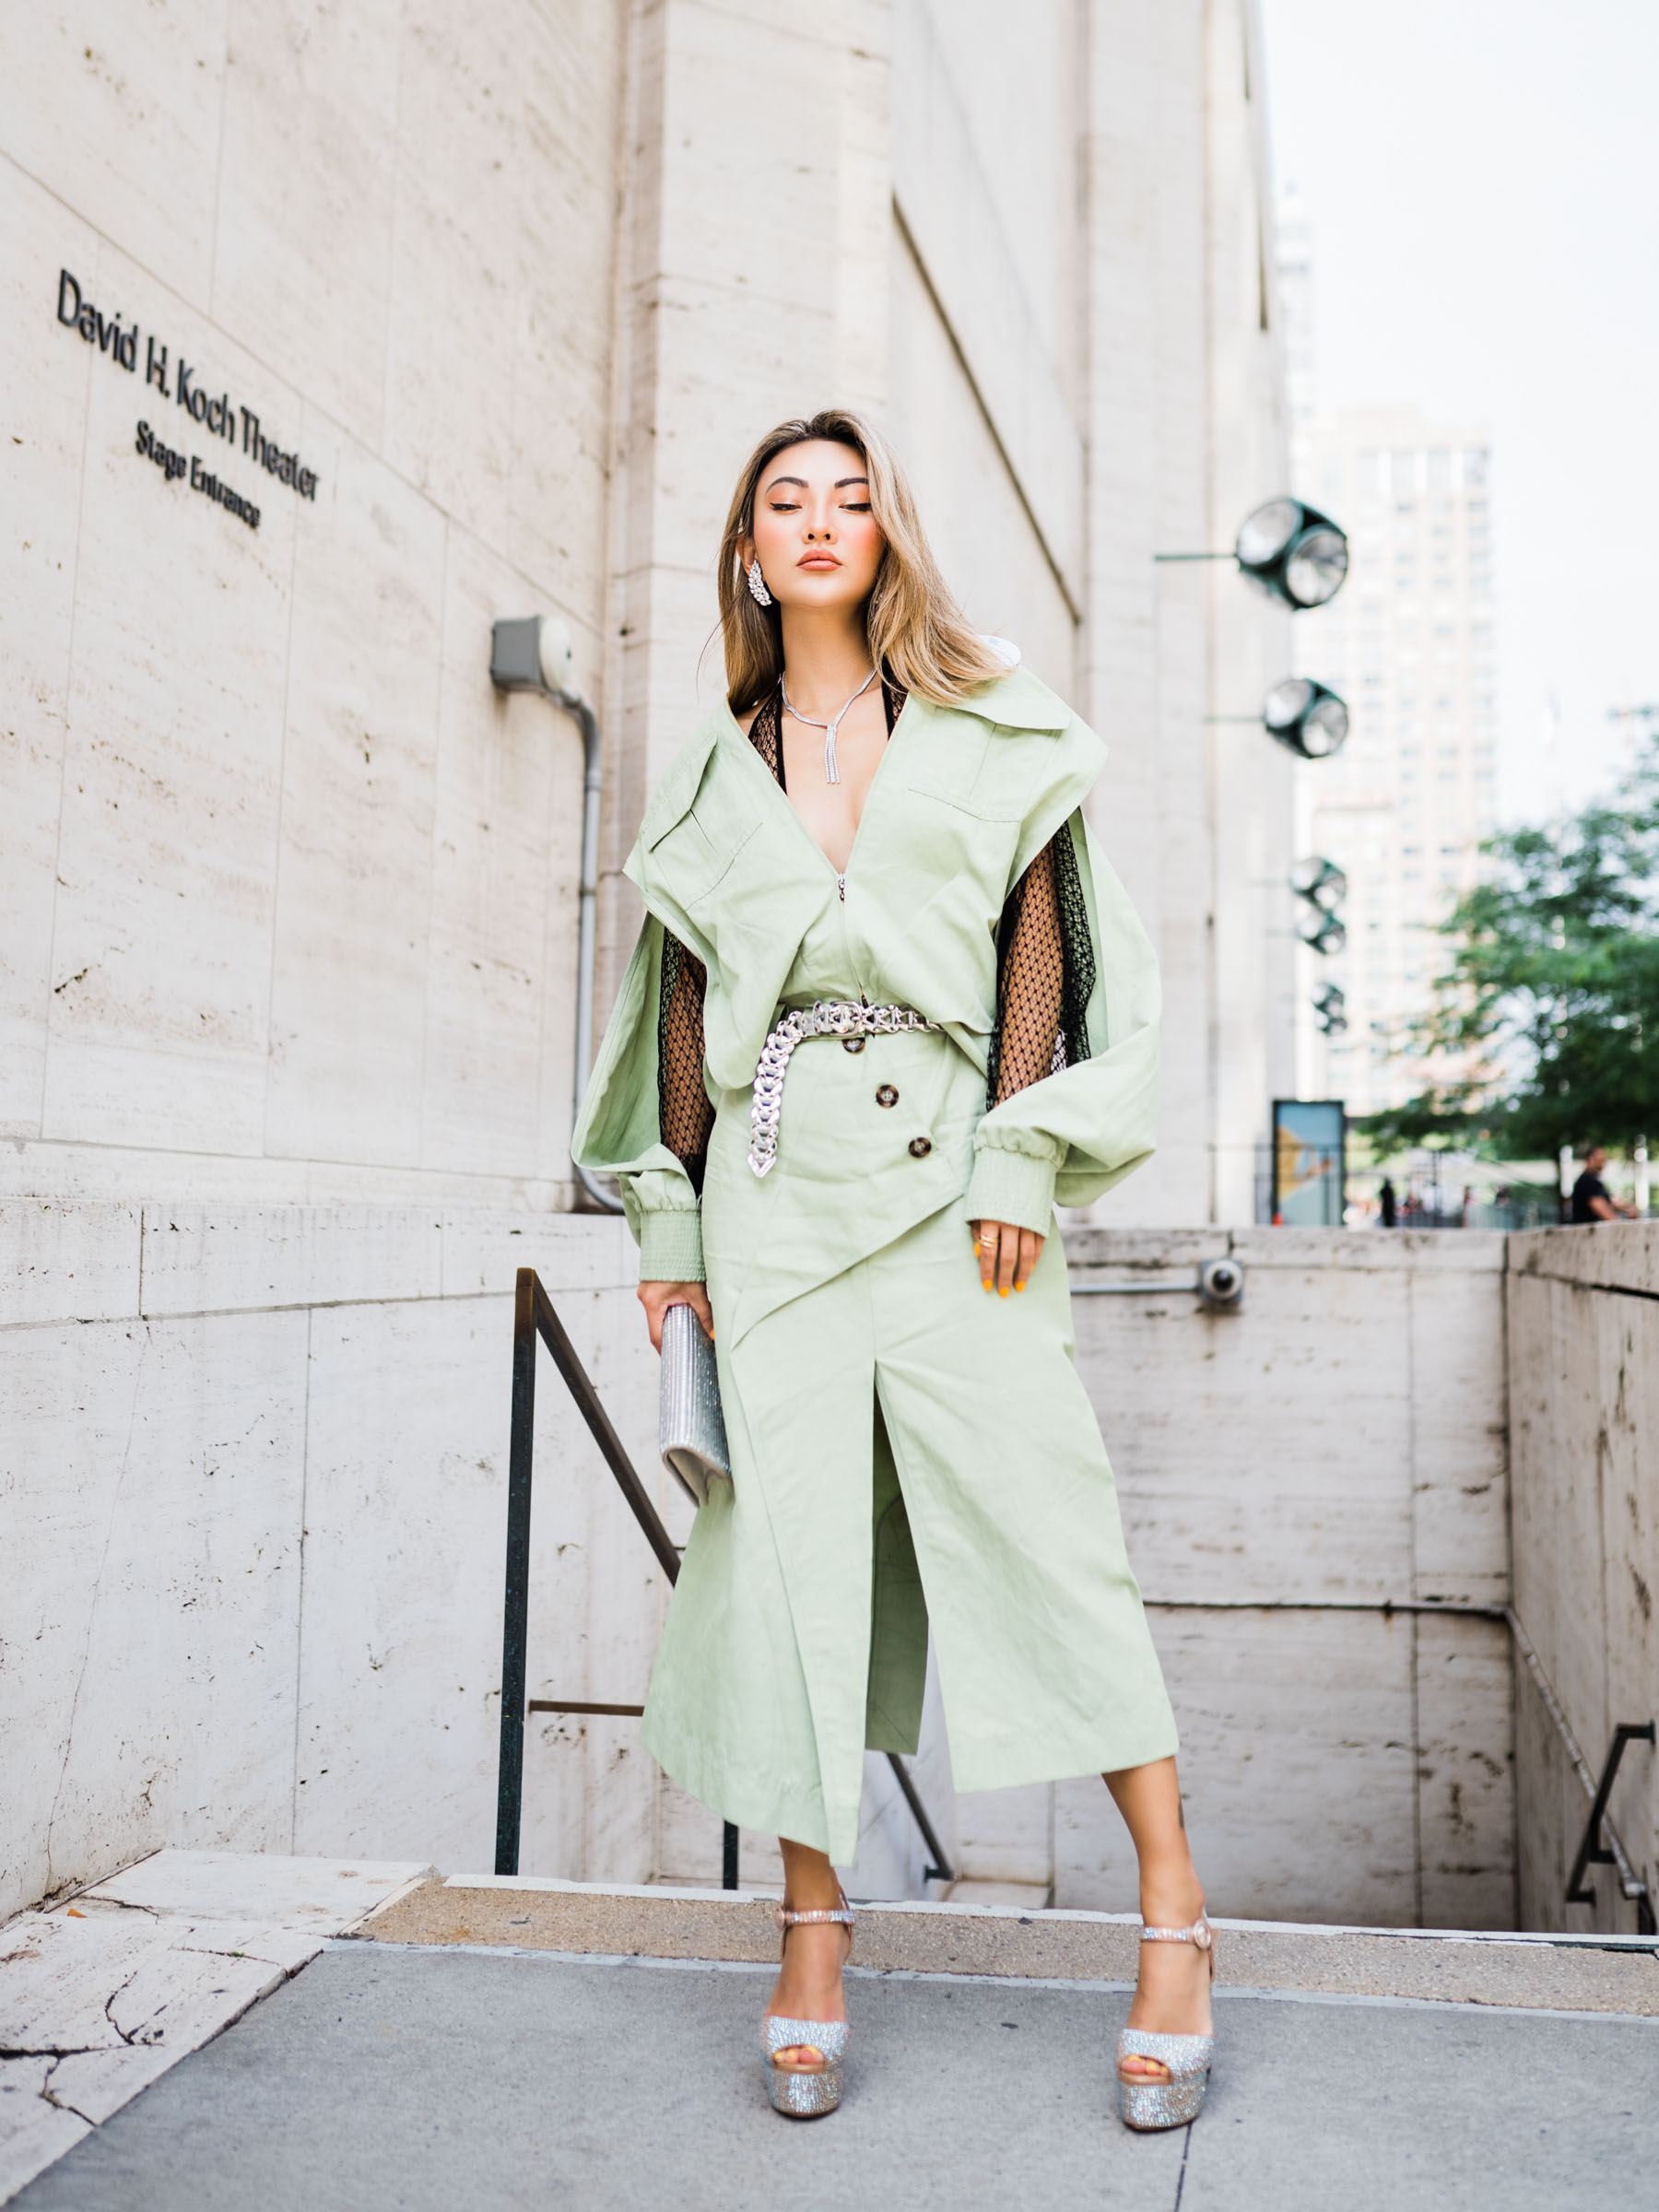 biggest fall fashion trends 2019, pistachio green, green fashion trend, monochromatic green outfit, roland mouret dress // Notjessfashion.com